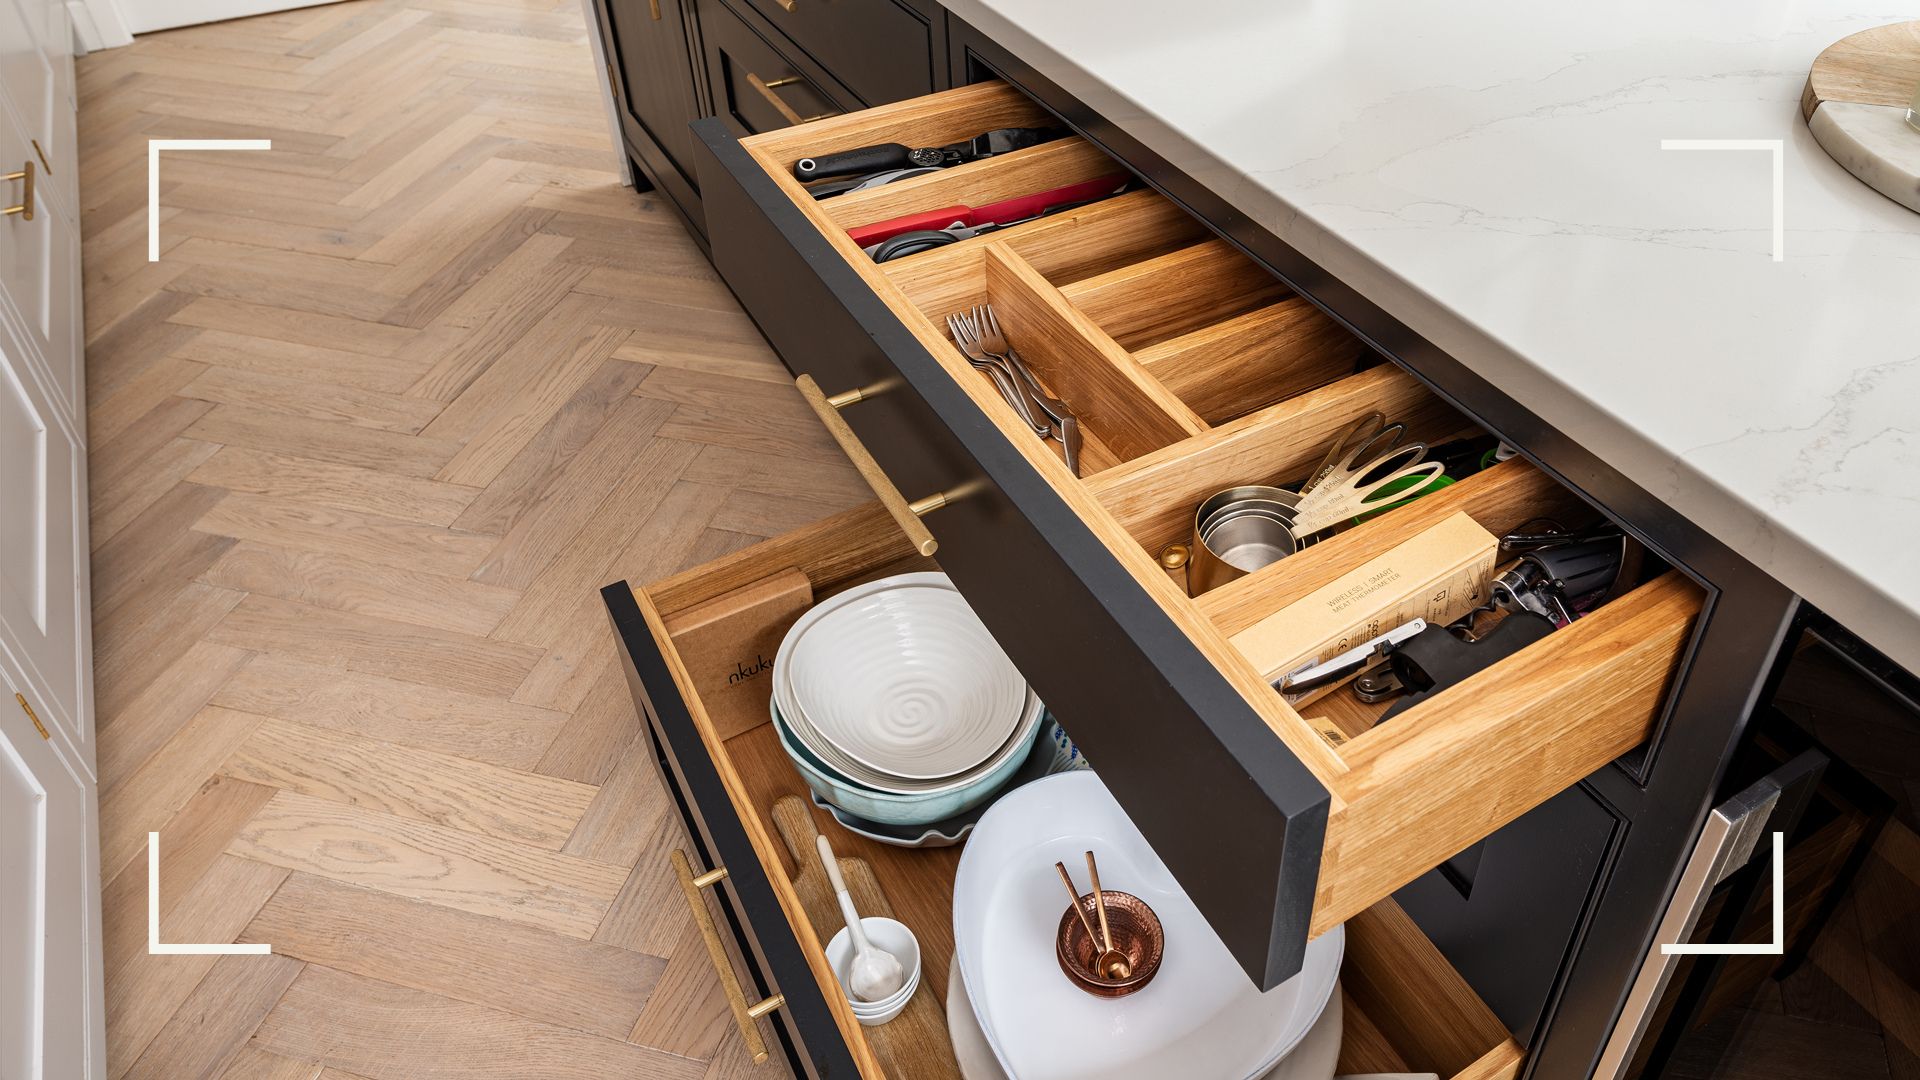 How to organize kitchen drawers – 12 ways to keep cooking essentials orderly